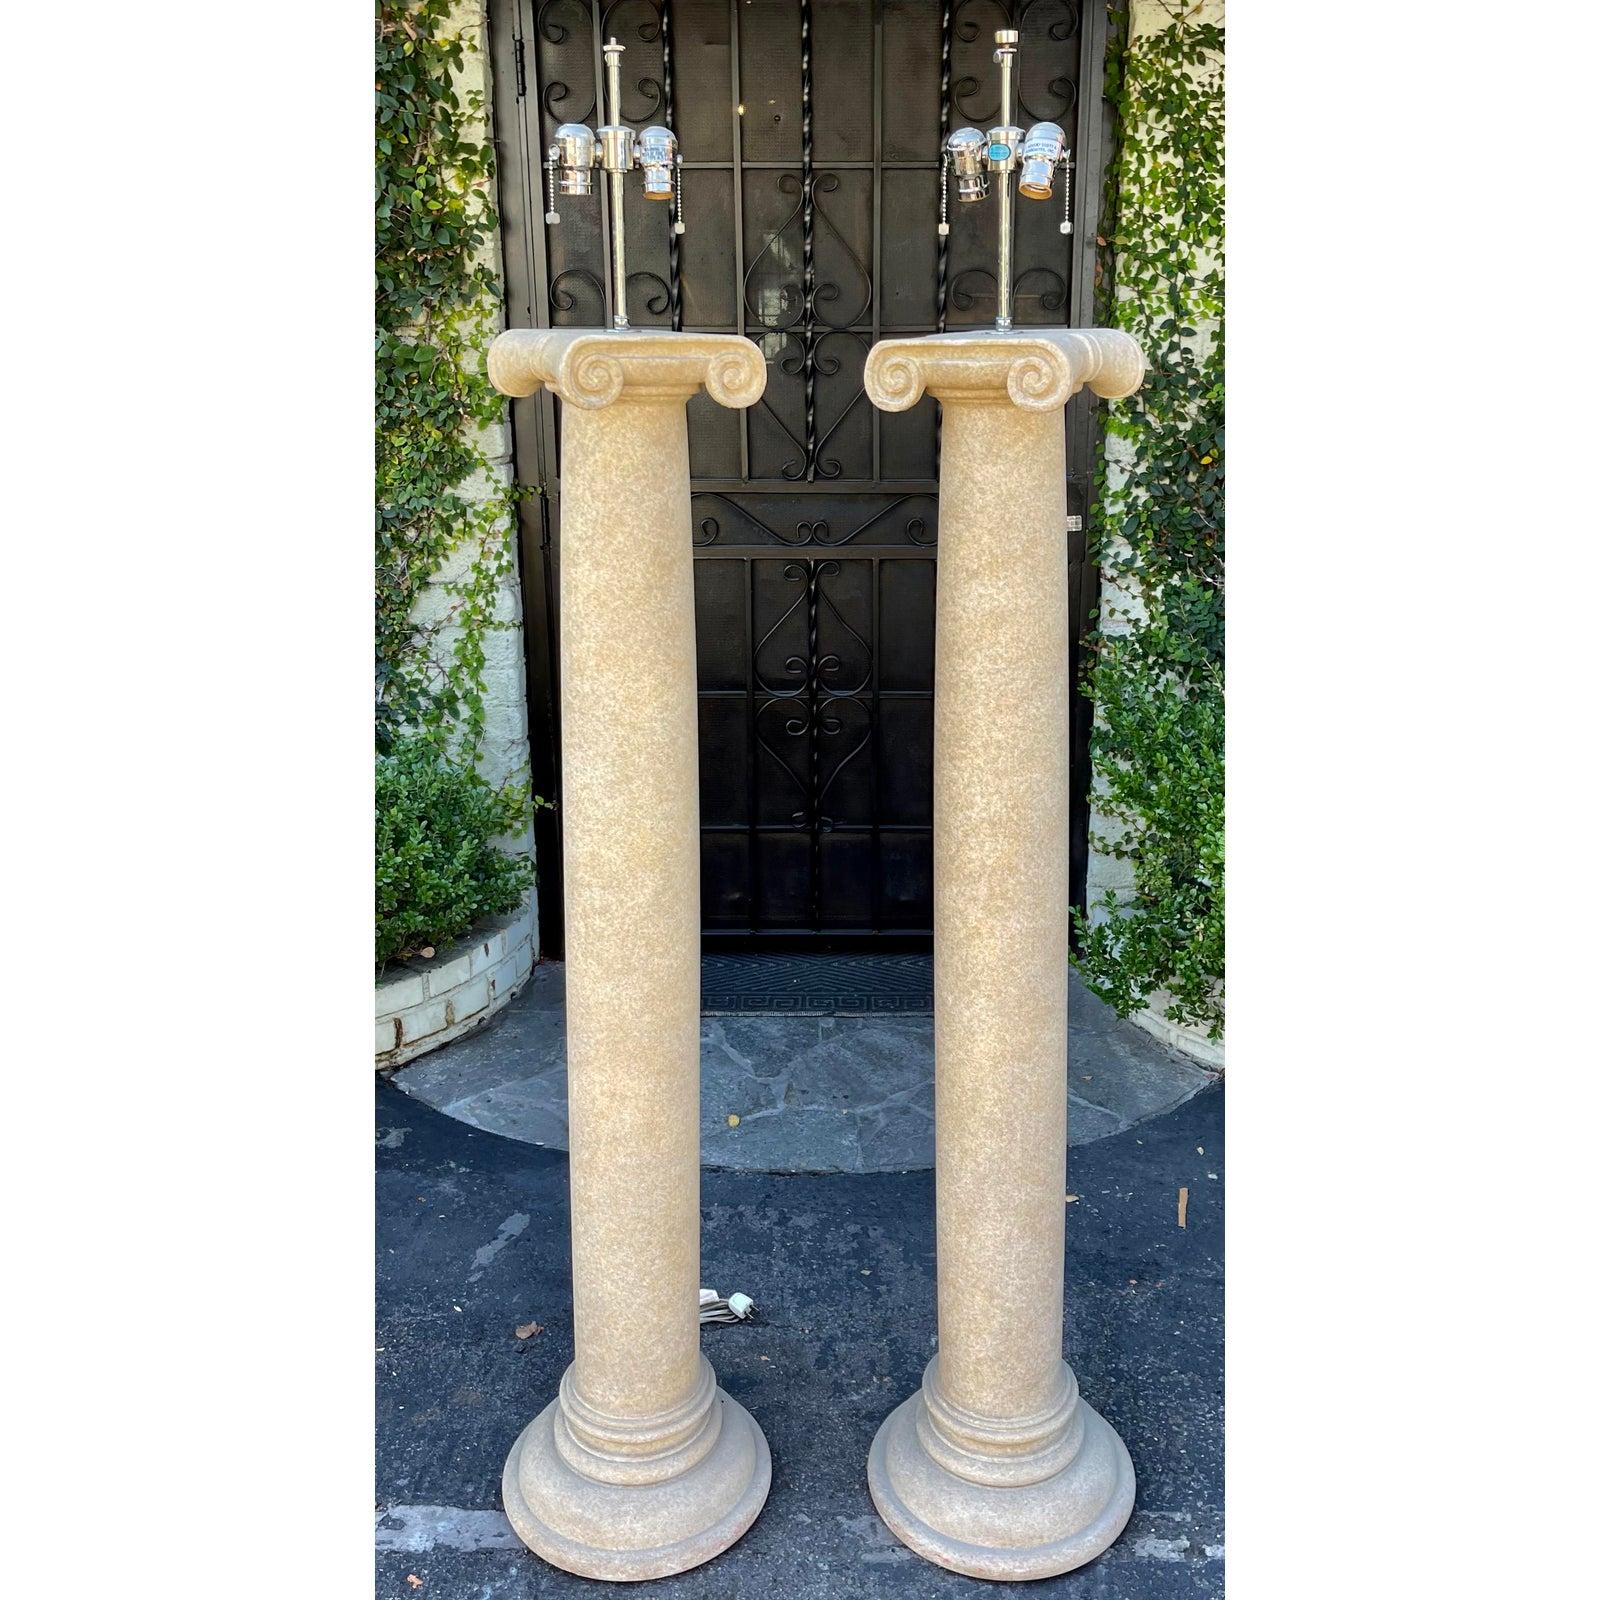 Sally Sirkin Lewis for J. Robert Scott Modern Neoclassical Column Floor Lamps. Each features a faux stone finish on solid wood and includes the original cluster marked J. Robert Scott.

Additional information:
Materials: Wood
Color: